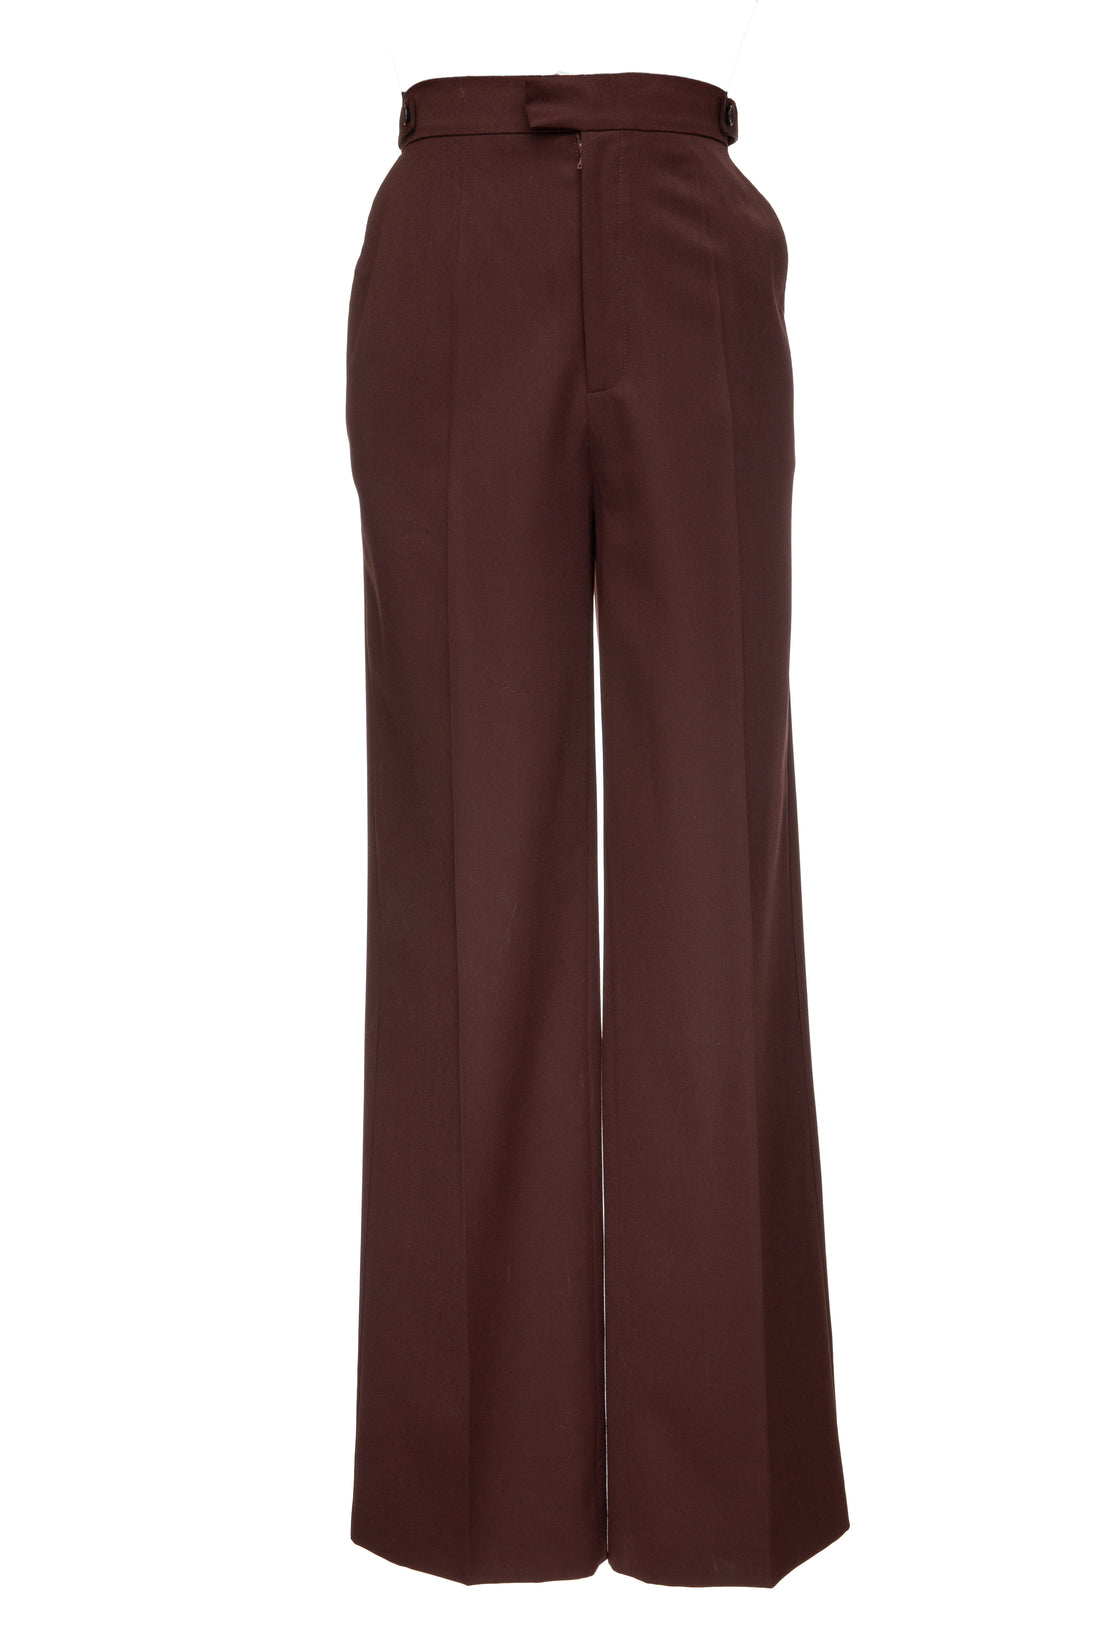 SITUATIONIST Burgundy Trouser